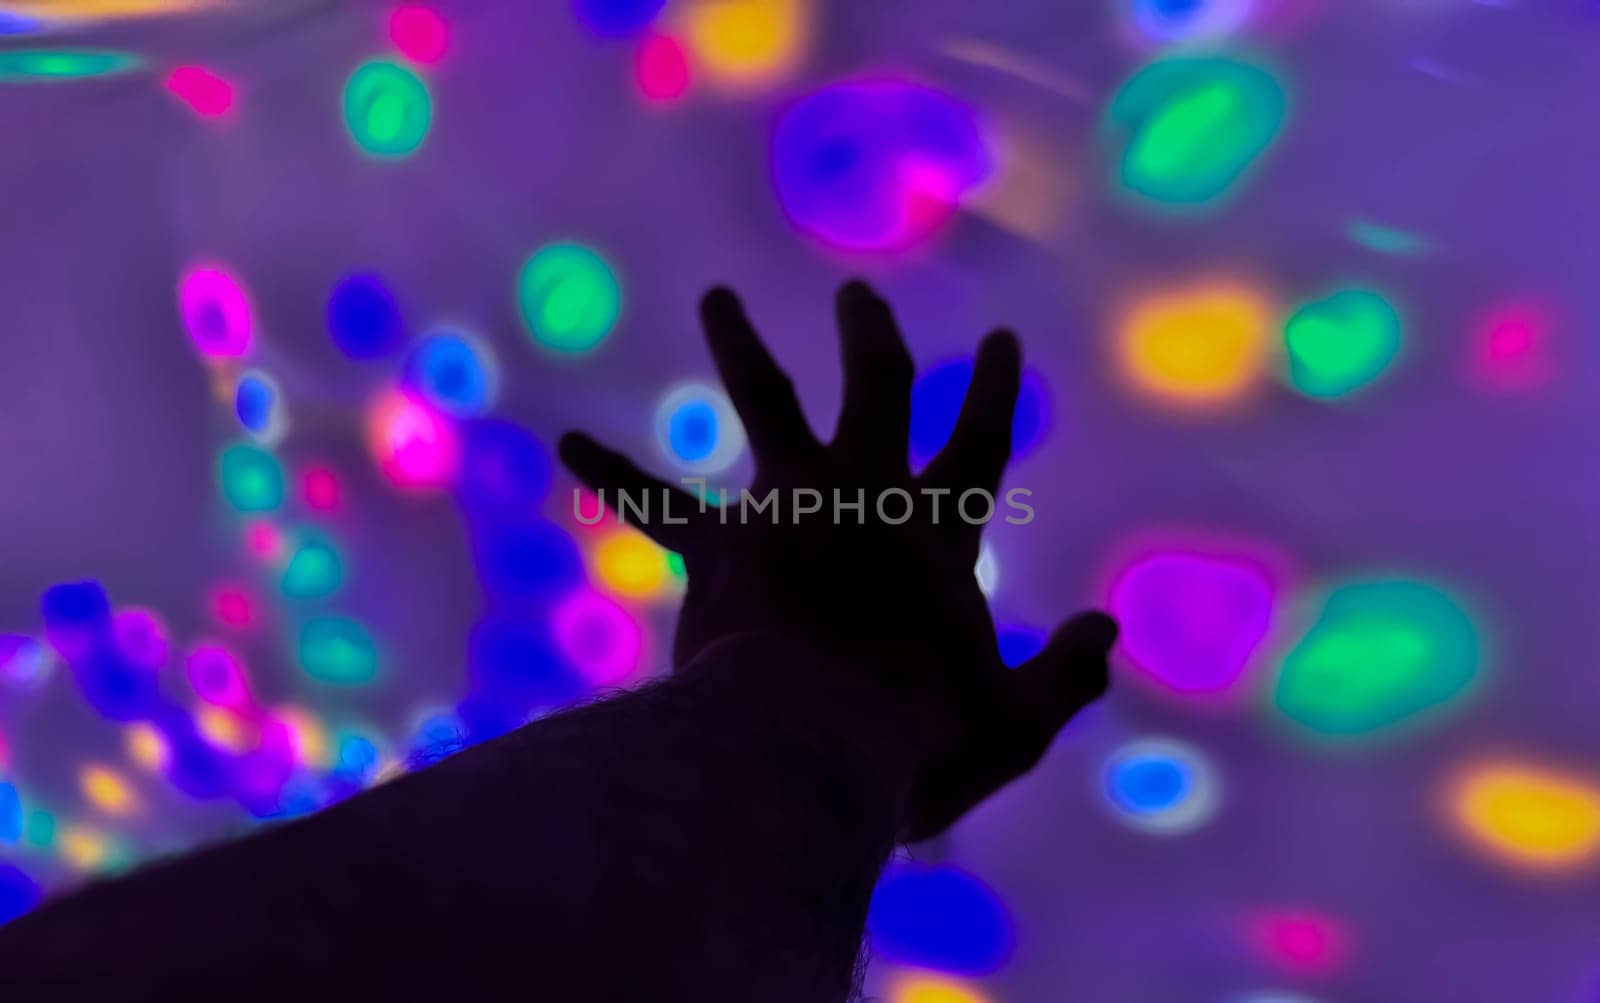 Hand gesture silhouette on a colorful background reaching out, saying hello, and show number represent for multimedia content creation